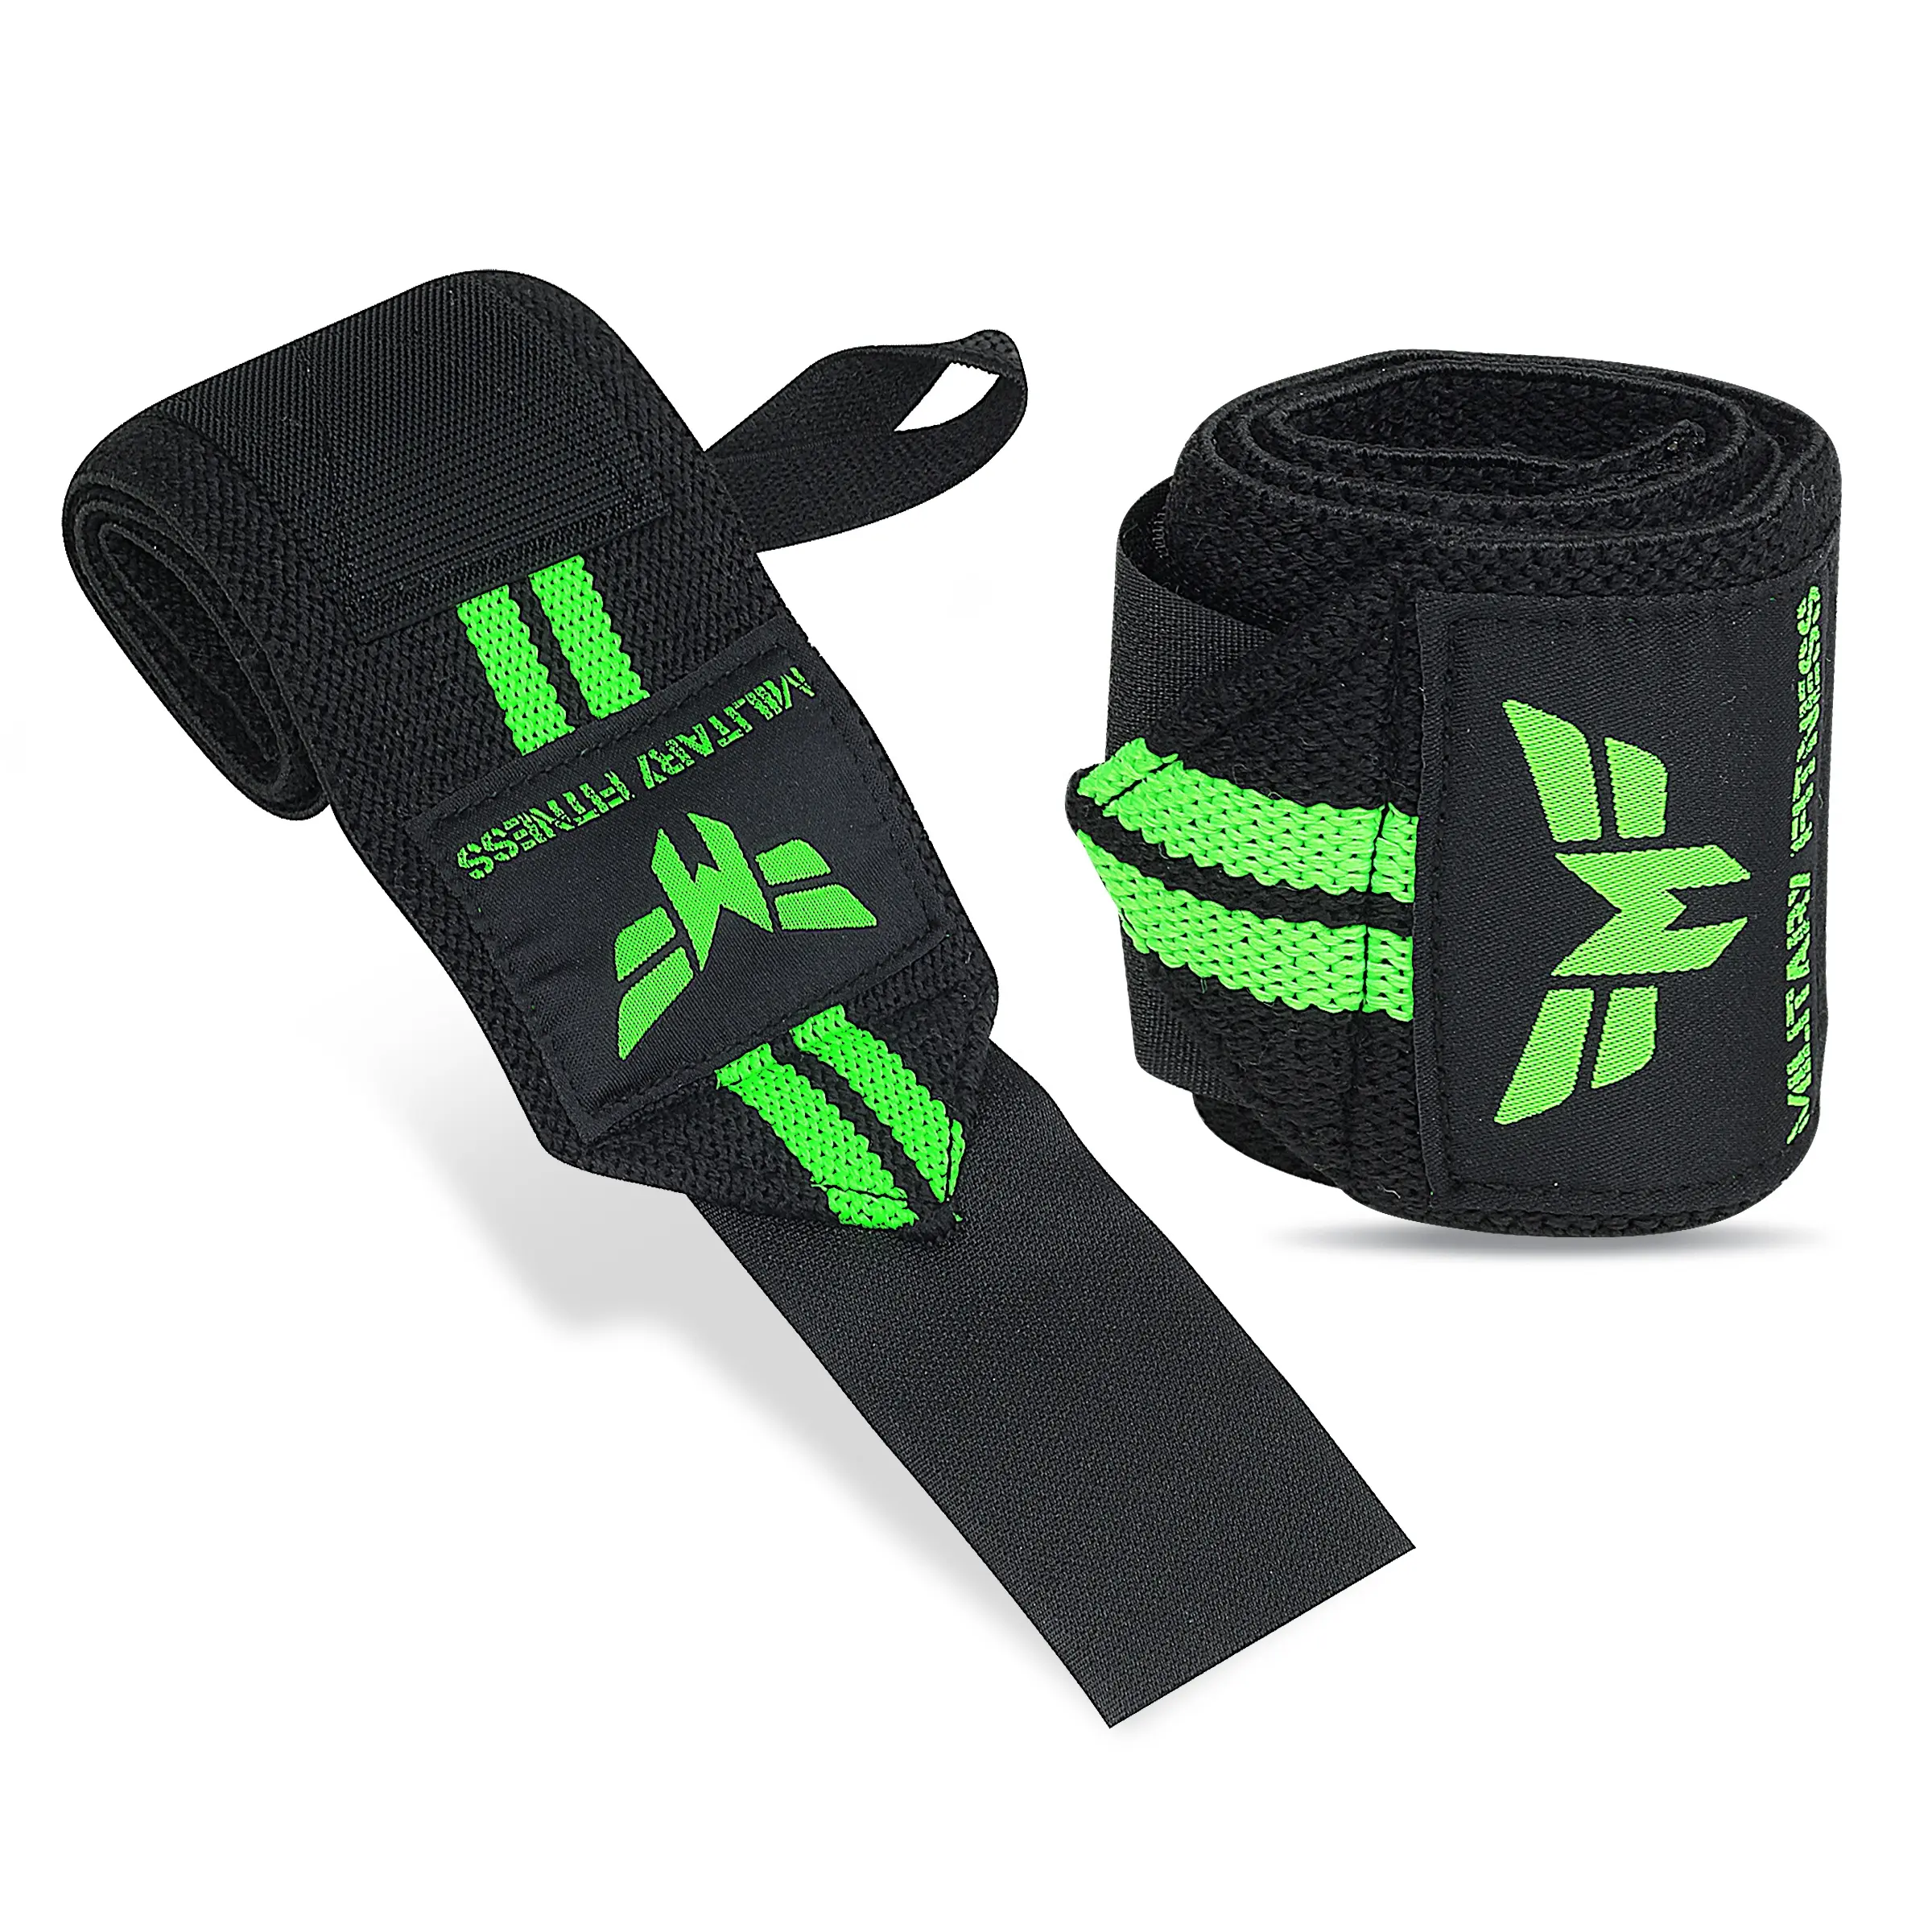 Best Value Gym Weightlifting Wristband Hand Wraps for Strength & Fitness